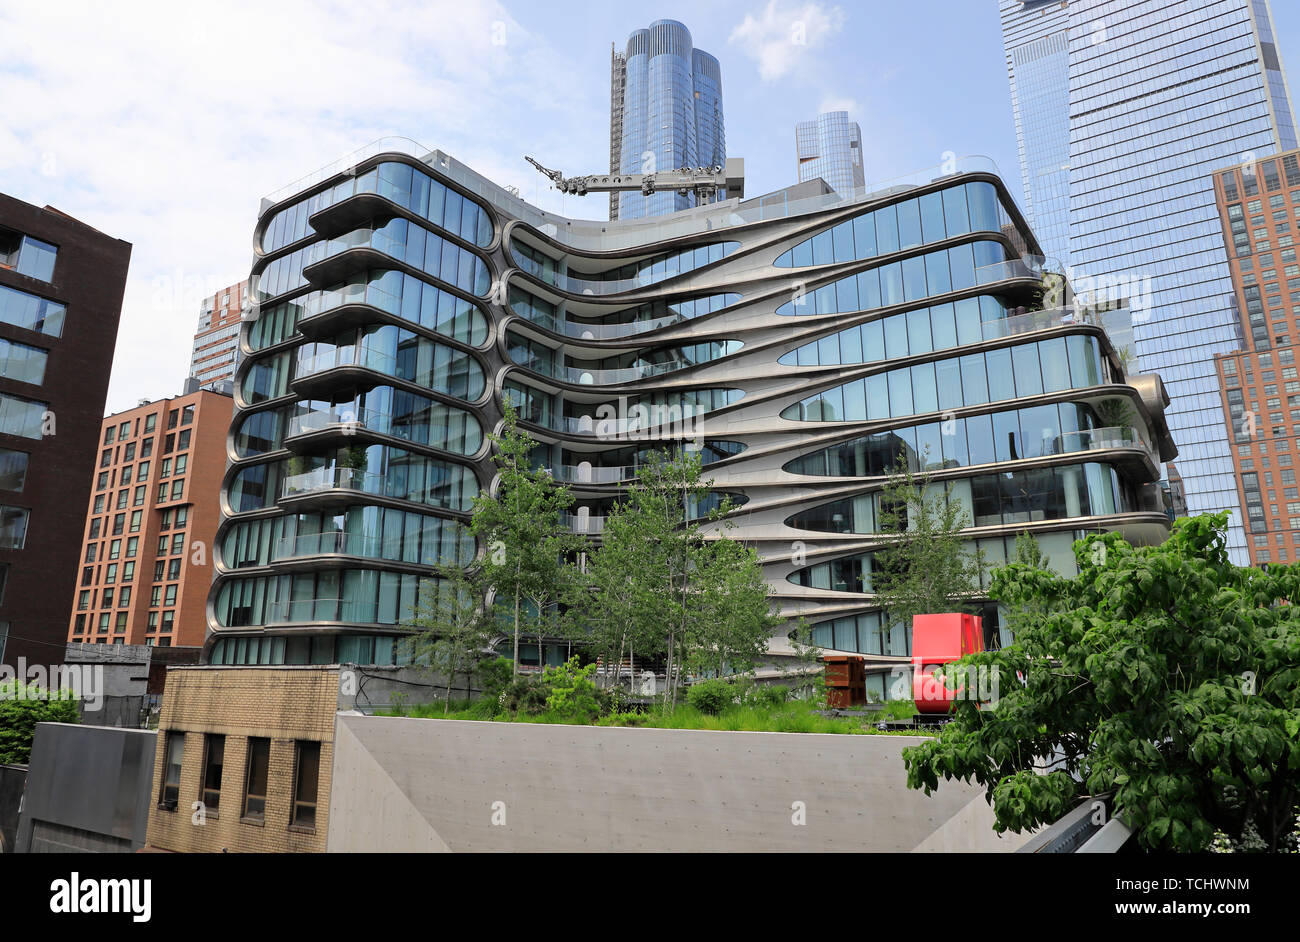 The 520 West 28th Street building, a luxury apartment building designed ...